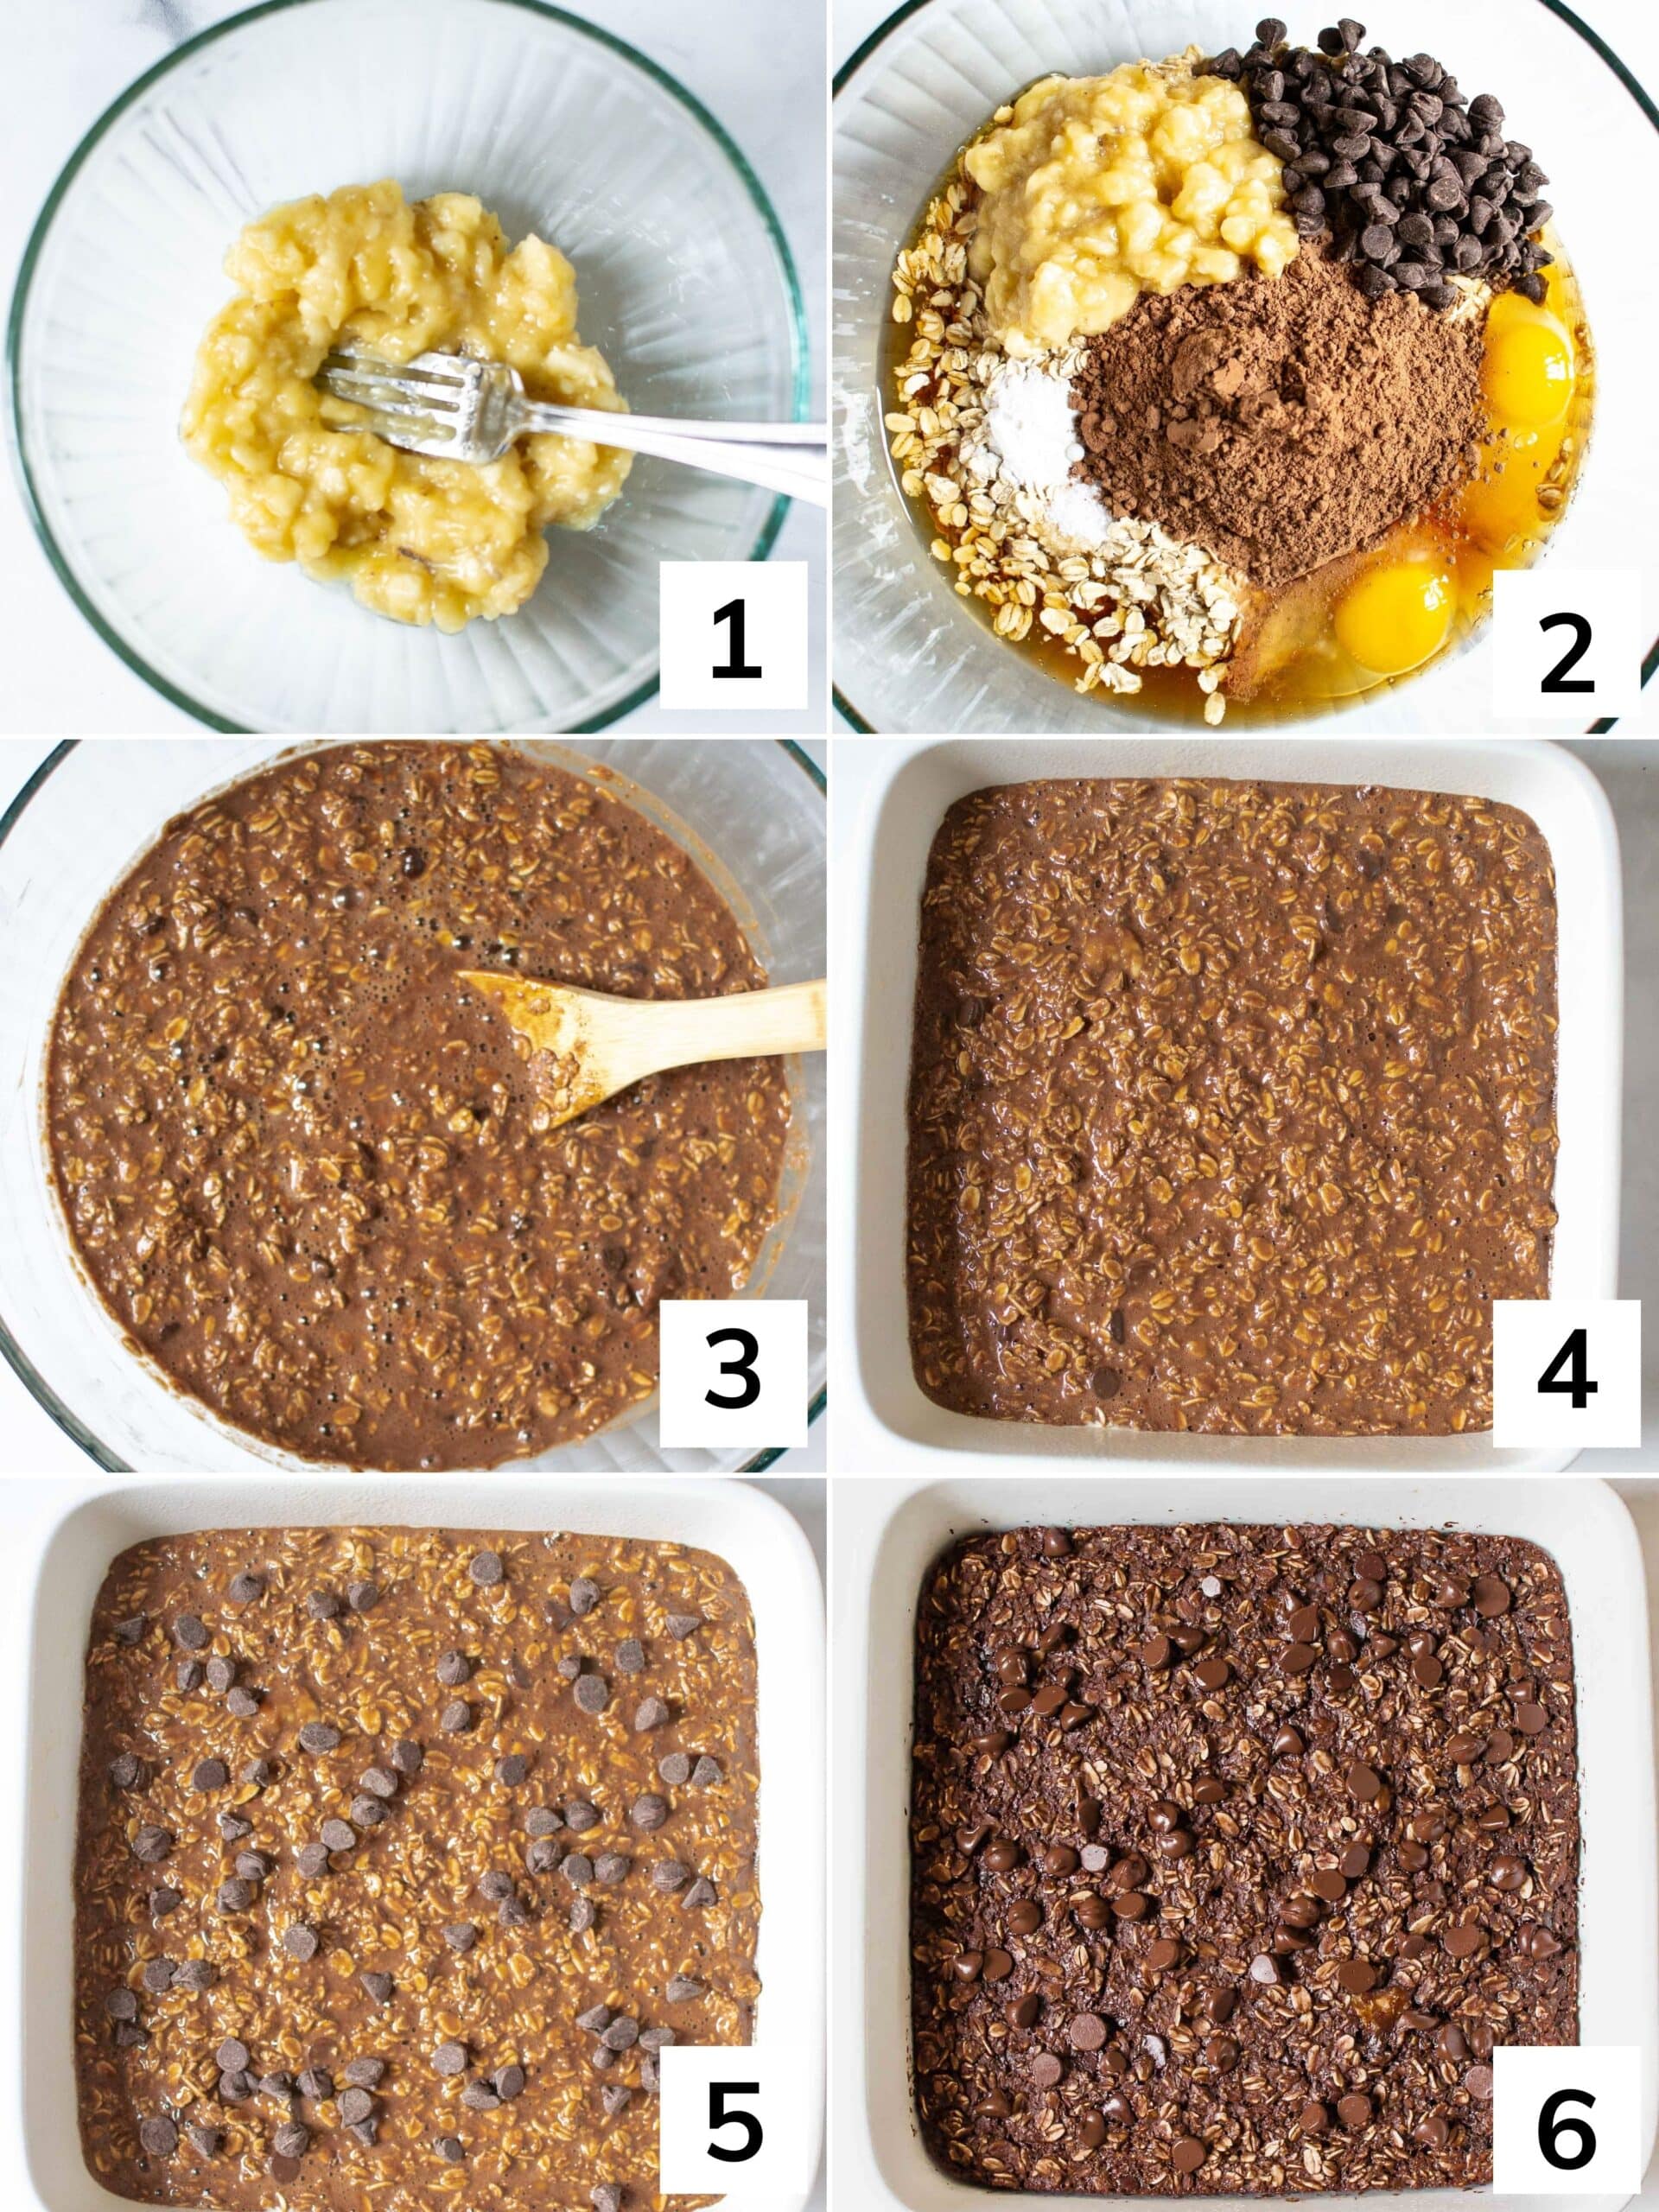 How to. make Chocolate Baked Oats step by step instructions